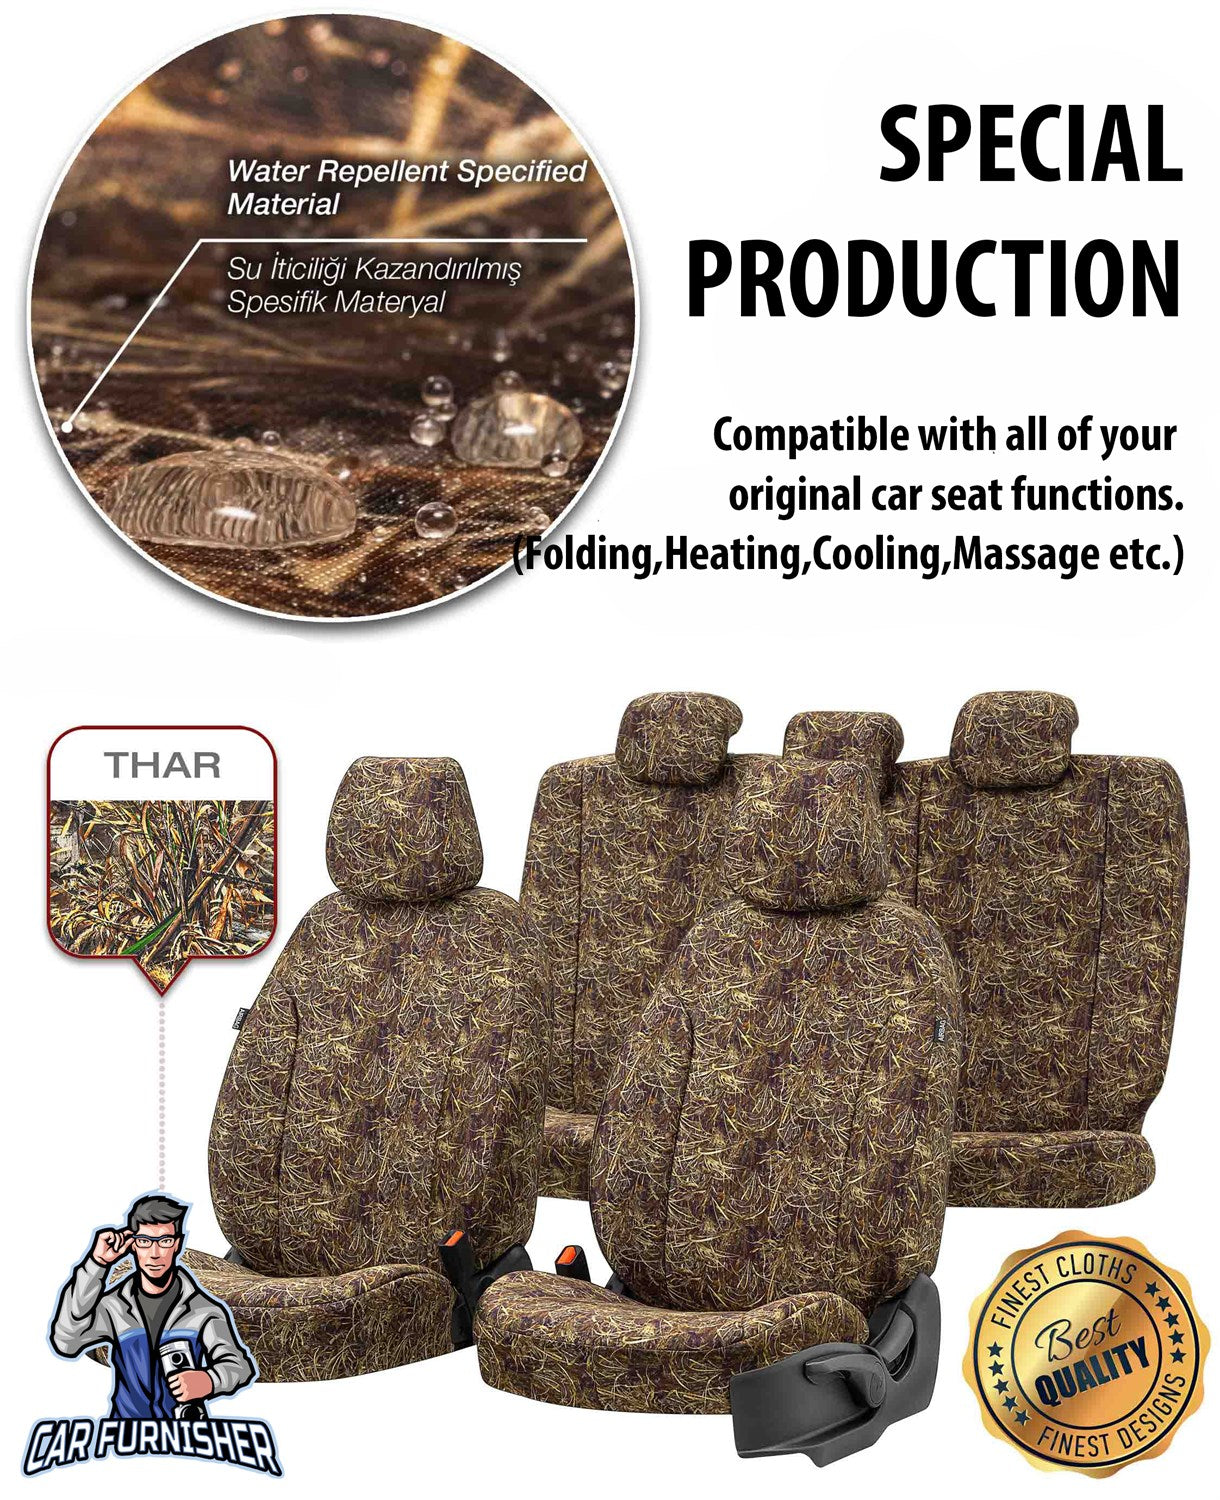 Fiat Freemont Car Seat Covers 2011-2016 Camouflage Design Everest Camo Fabric